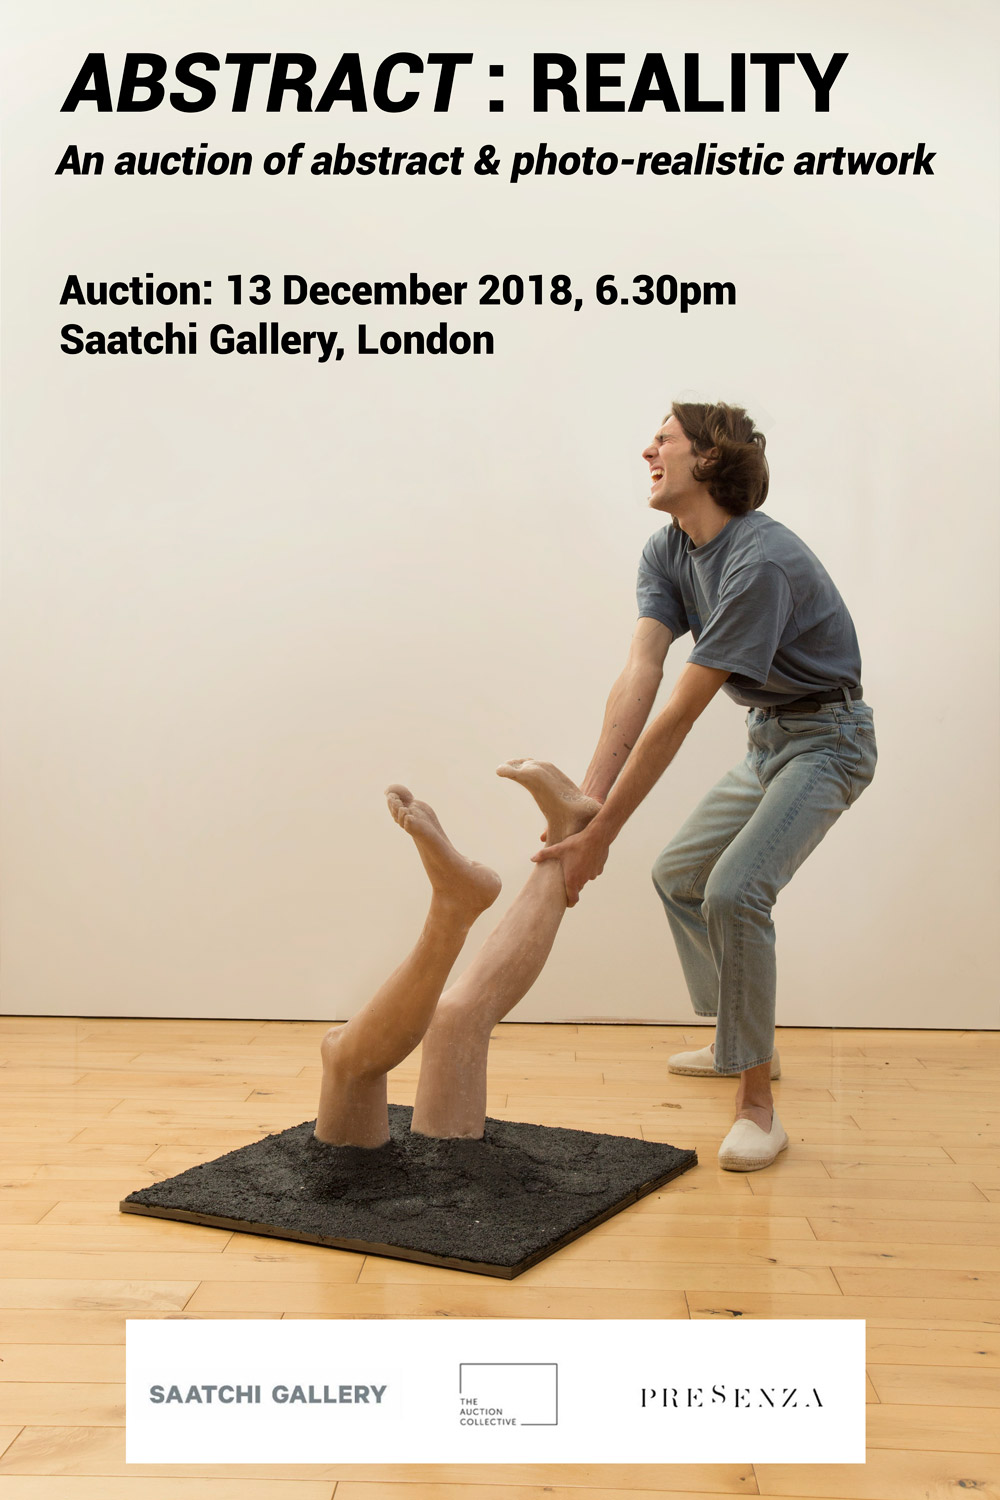 6th to 13th of December 2018 at the Saatchi Gallery / London. The auction will take place at 7.00 pm on Thursday, 8th of December.